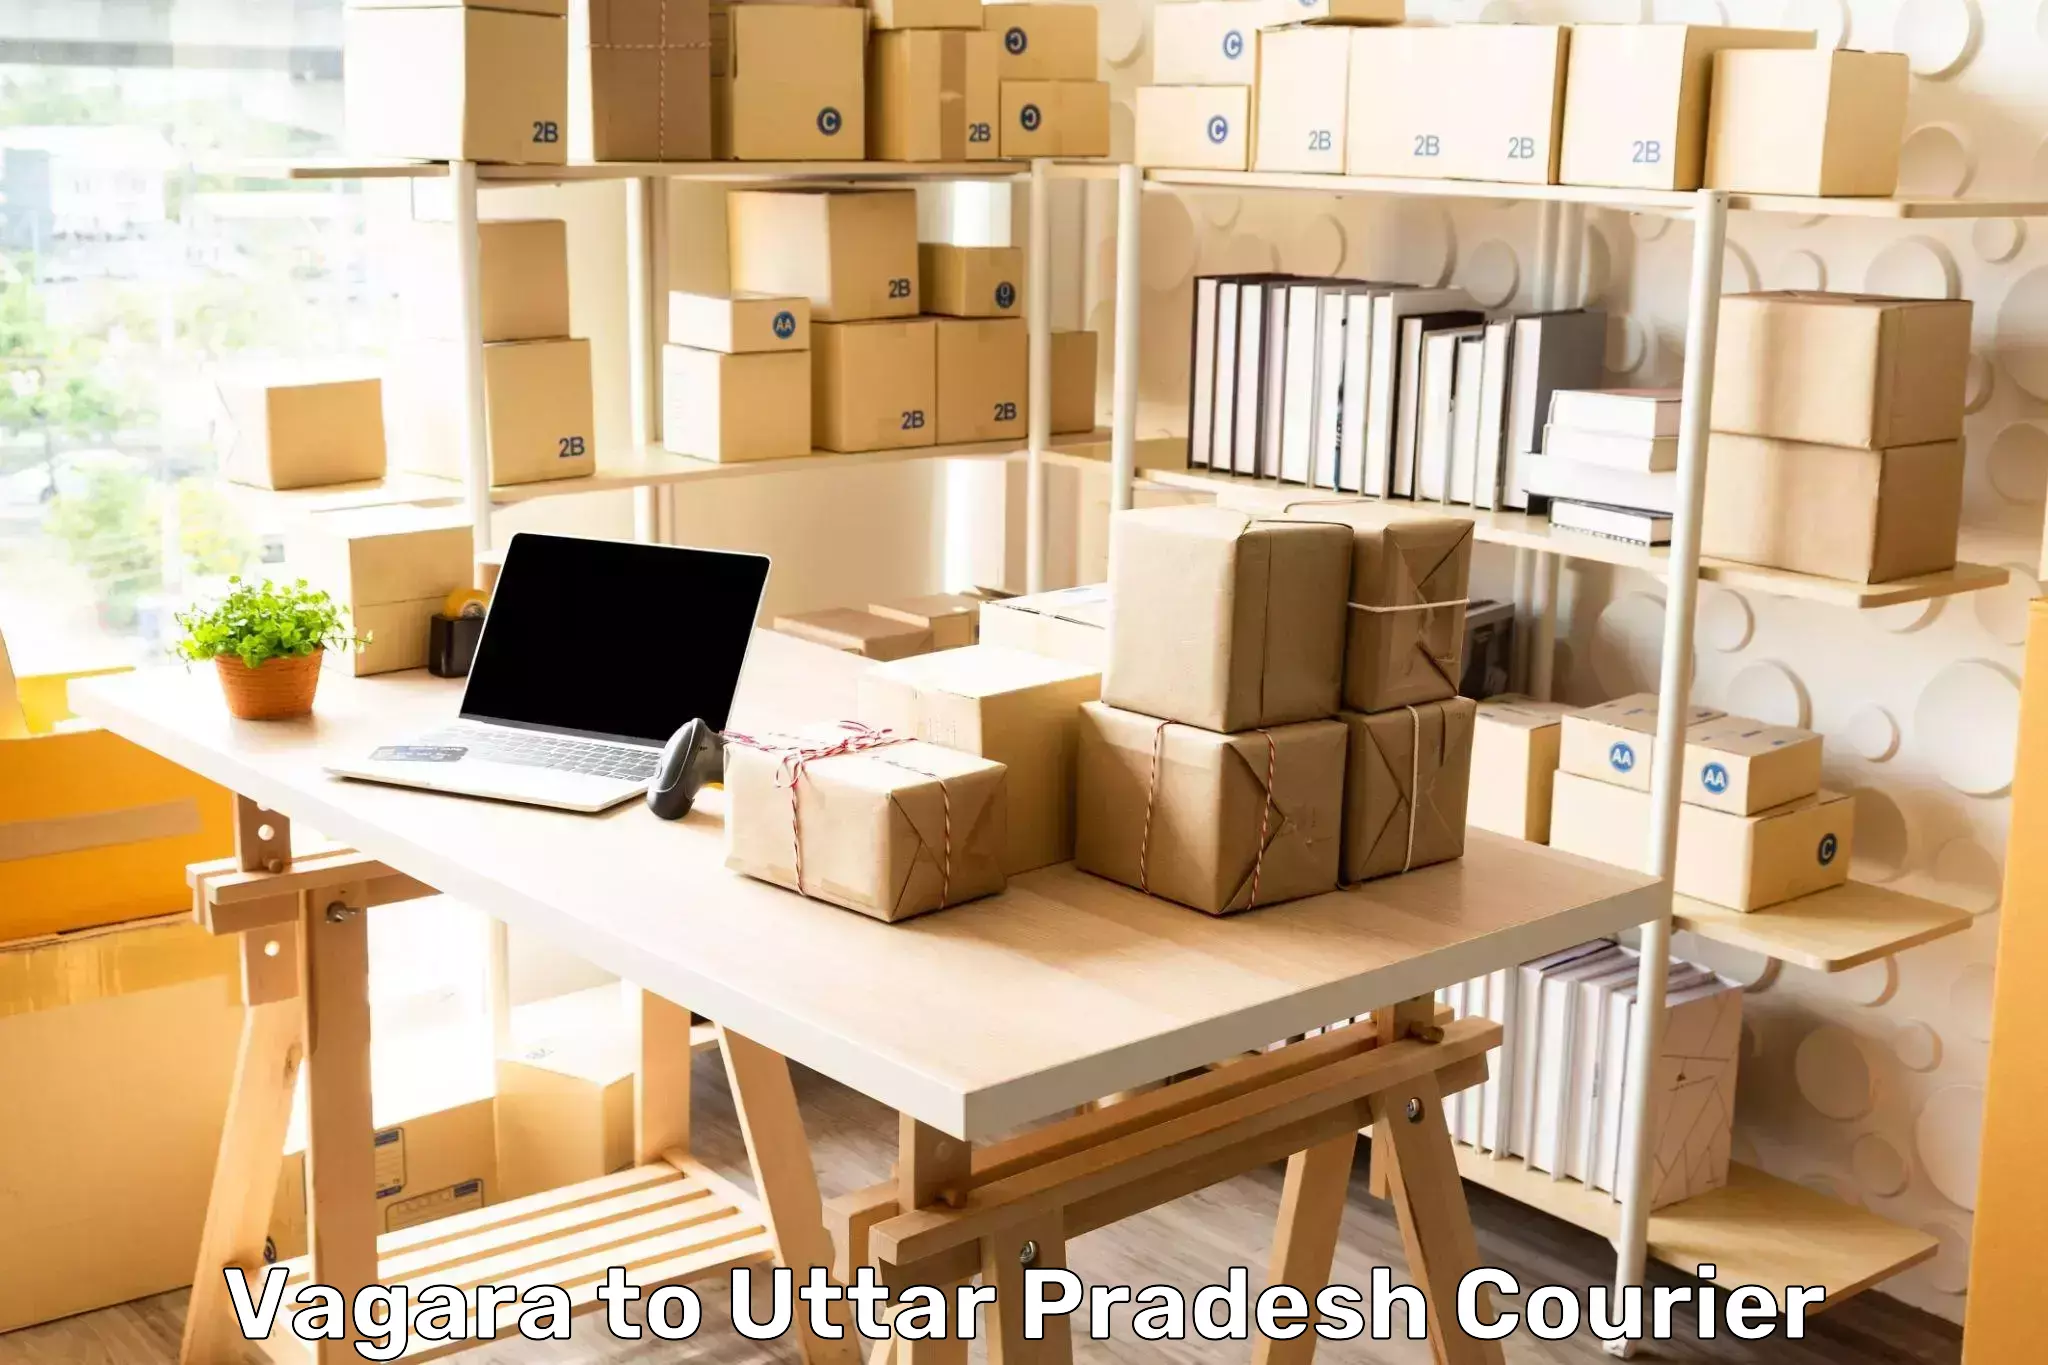 State-of-the-art courier technology Vagara to Laharpur